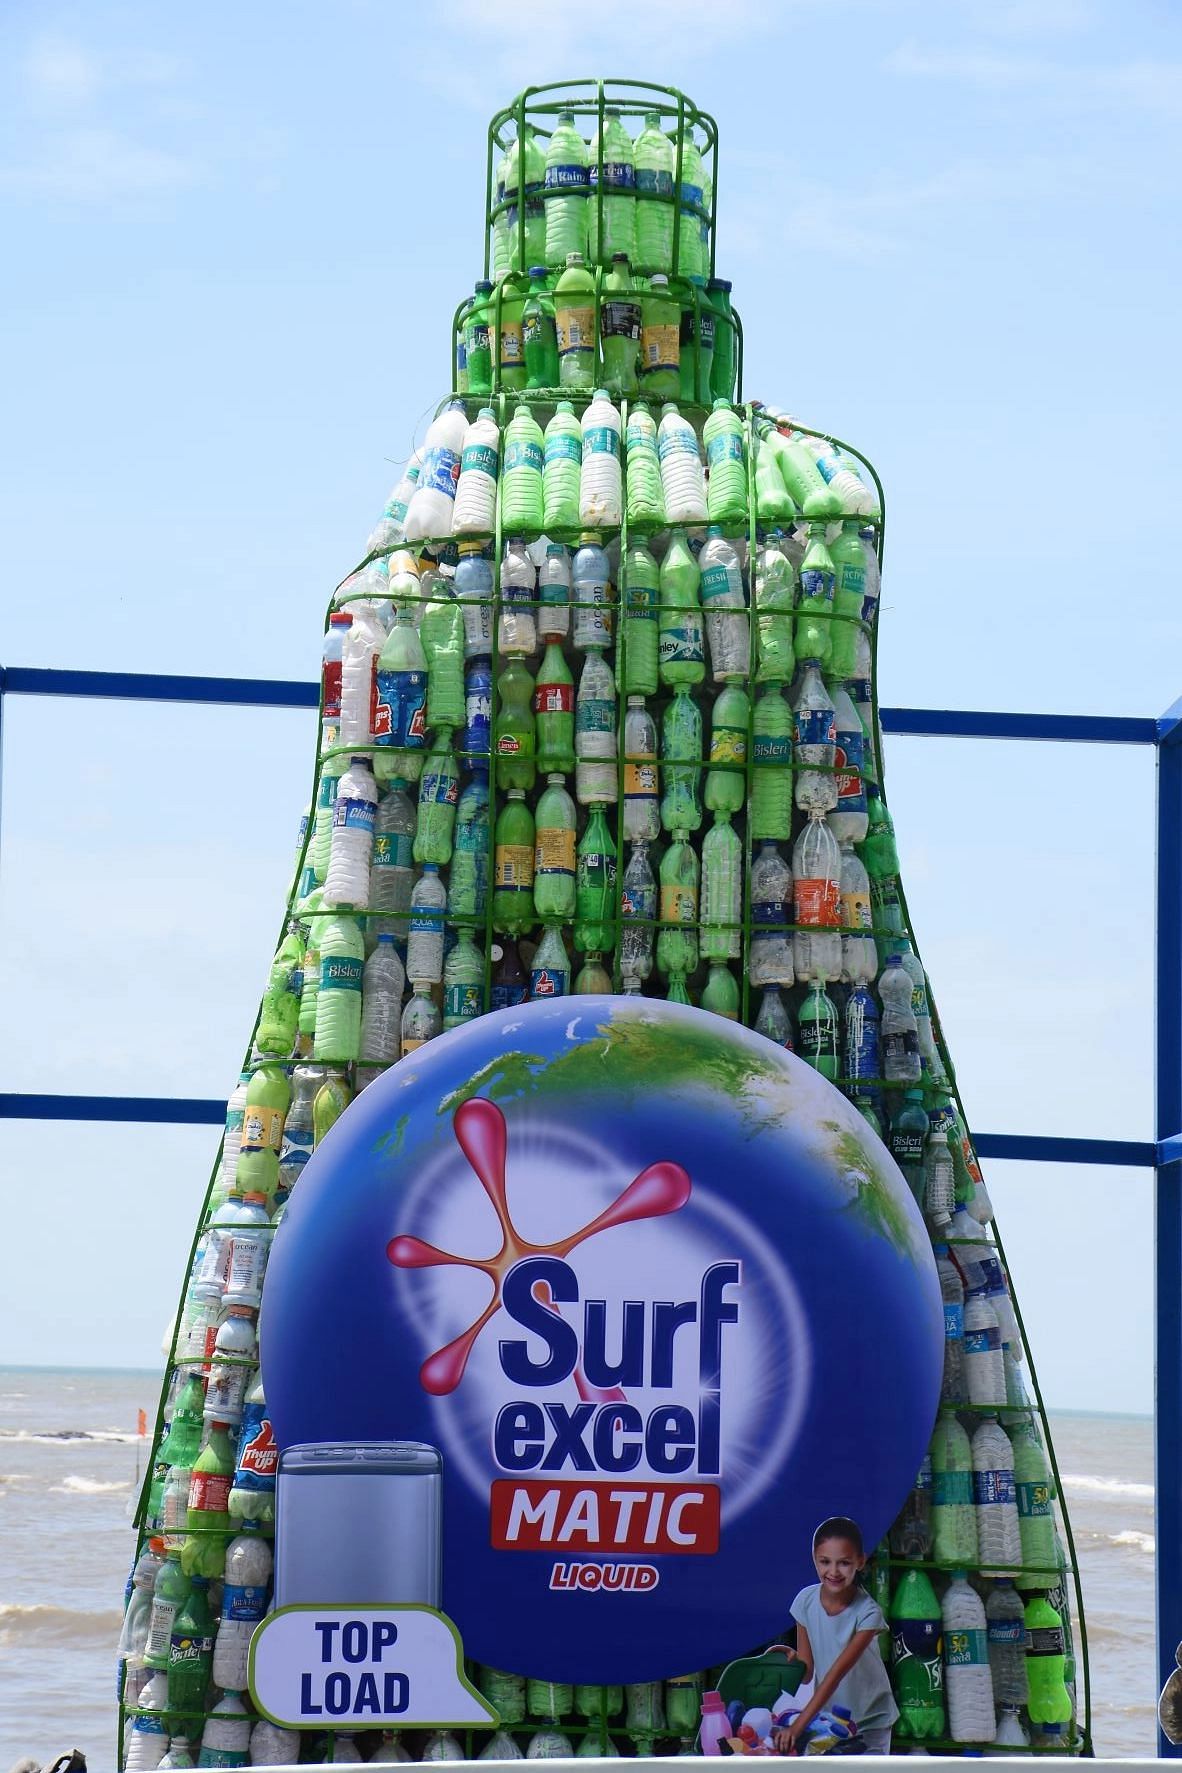 Surf Excel Matic’s bottle installation aims to reduce plastic wastage 